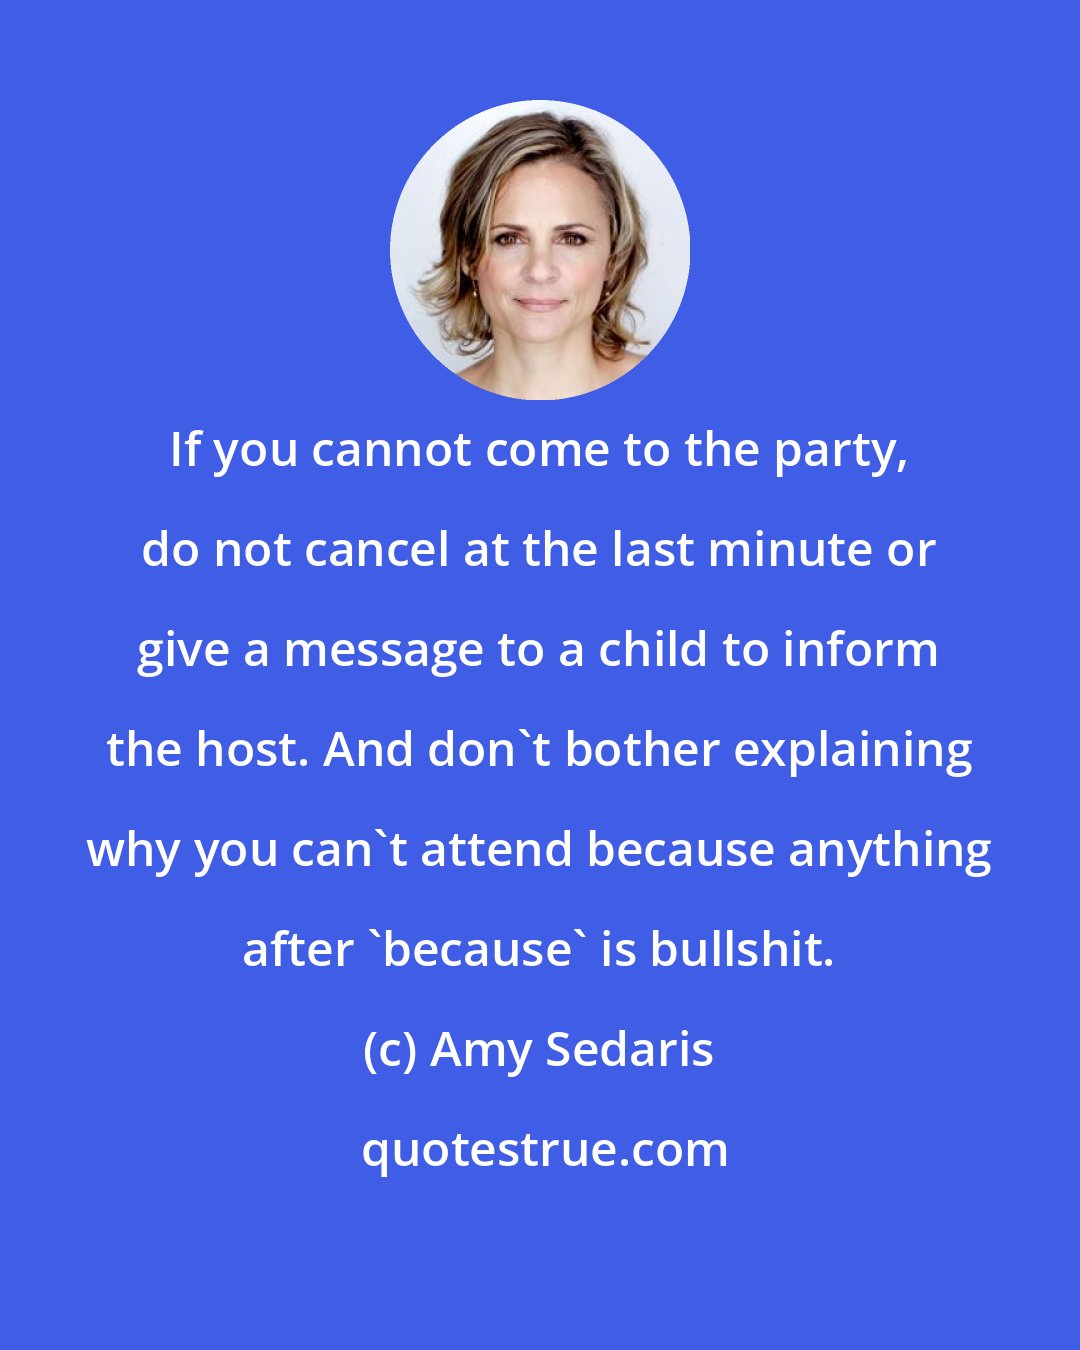 Amy Sedaris: If you cannot come to the party, do not cancel at the last minute or give a message to a child to inform the host. And don't bother explaining why you can't attend because anything after 'because' is bullshit.